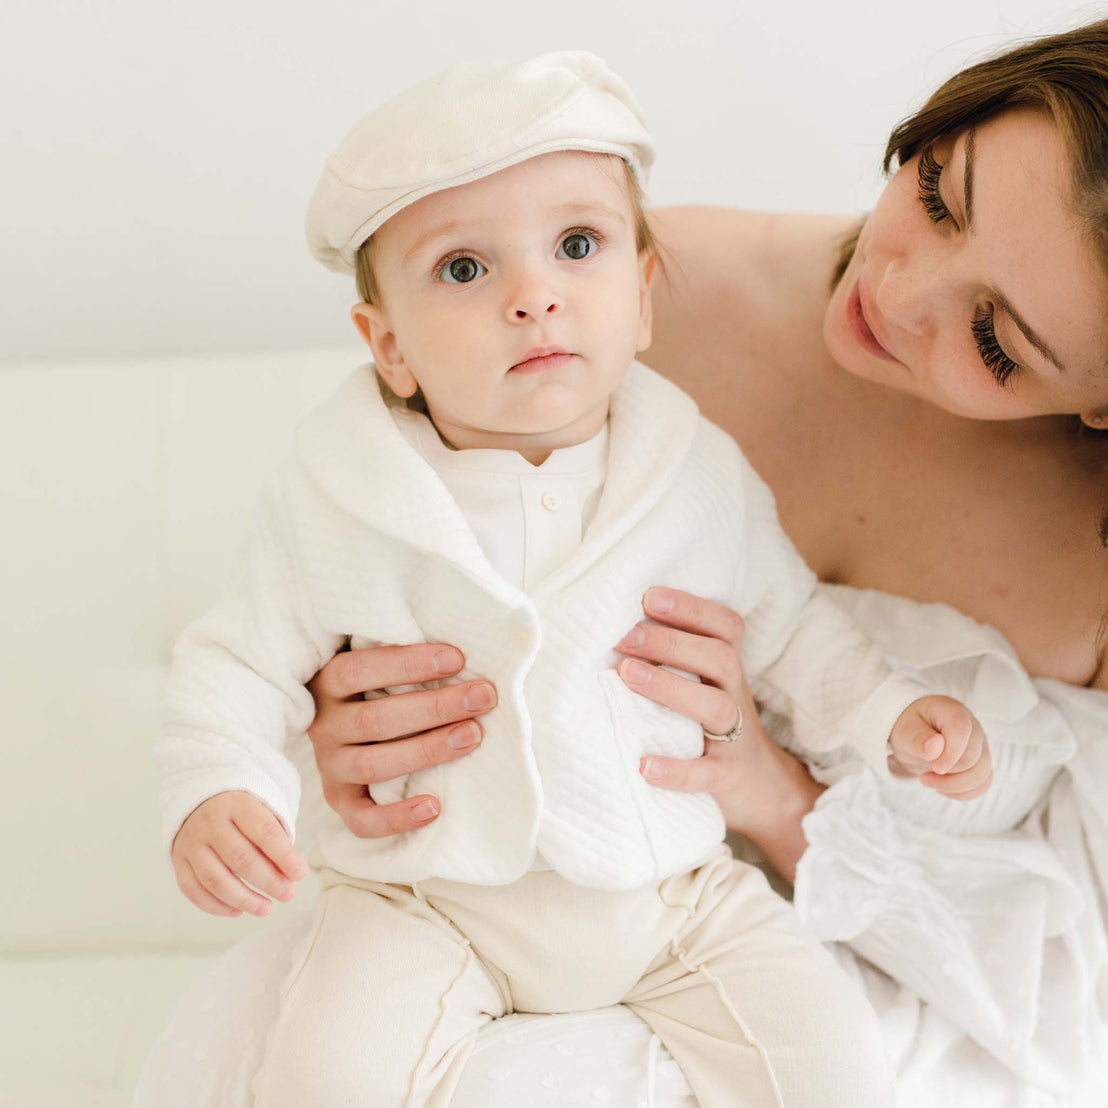 Baby boy sitting on his mother's lap. He is wearing the Braden 3-Piece Suit with the Newsboy Cap